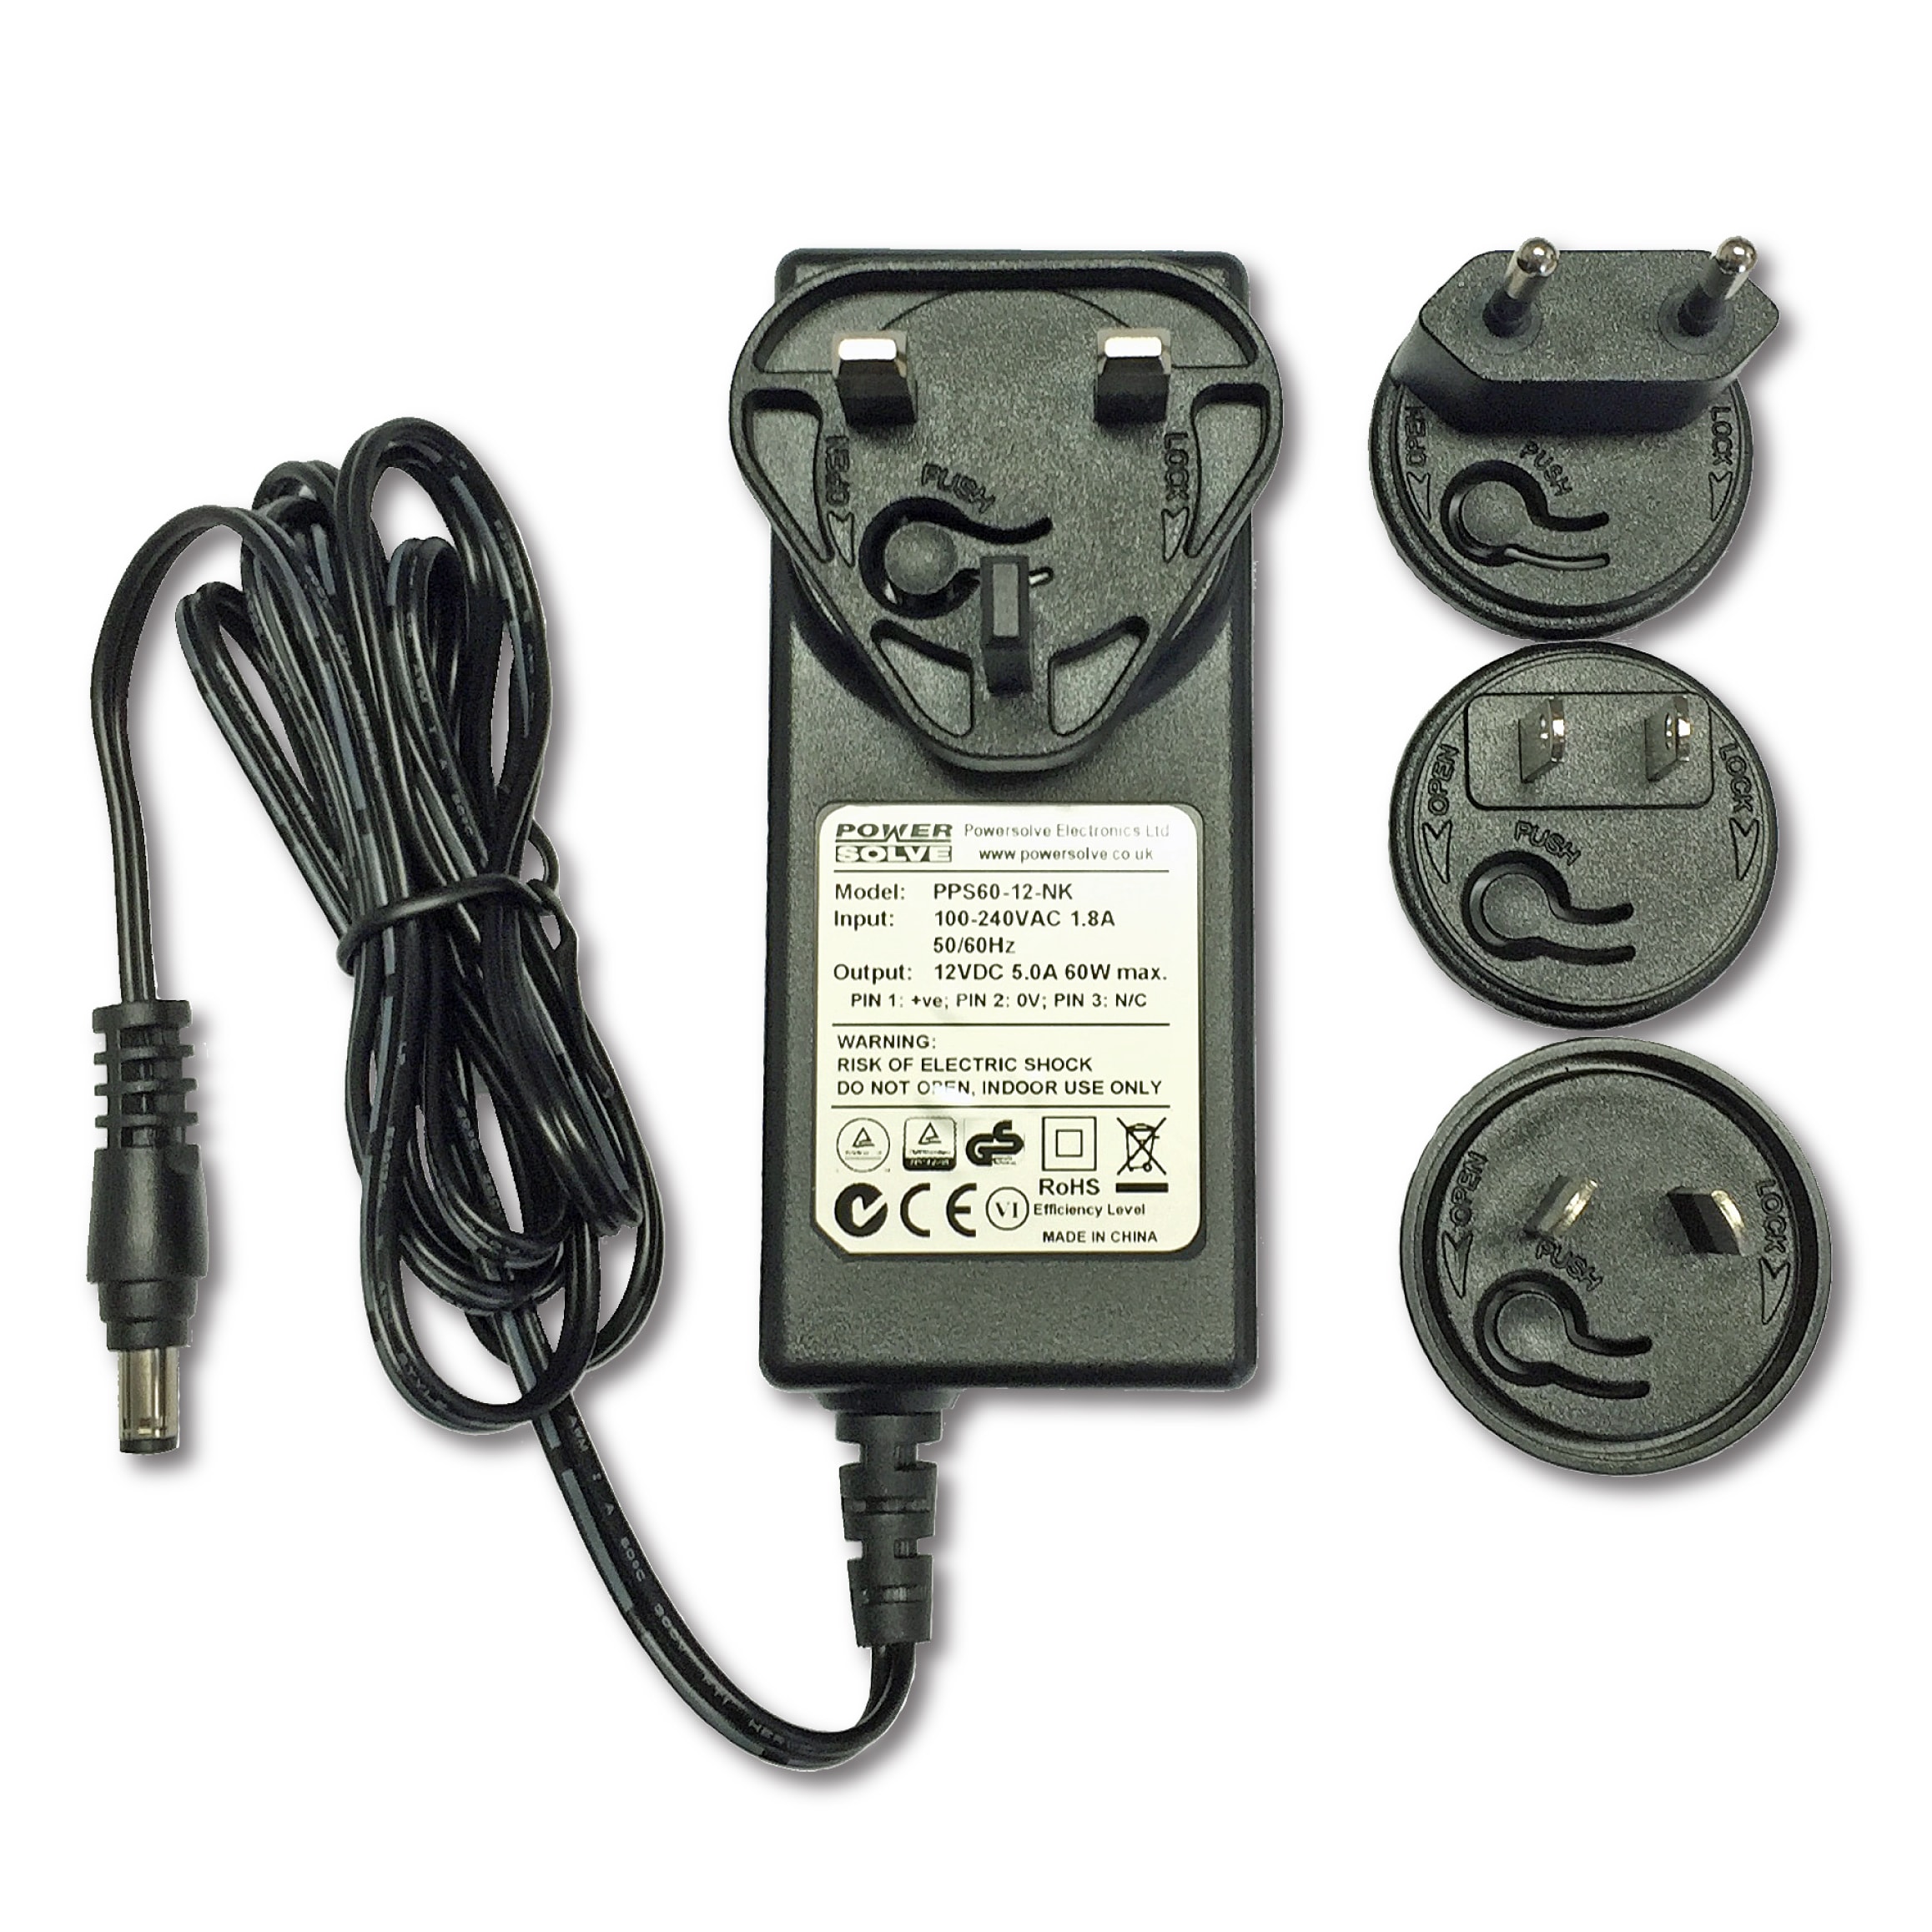 NEW!! 60Watt Plug Top Power Adaptor with interchangeable AC Plugs, 12V, 15V  and 24V Versions. CEC Level VI - PowerSolve